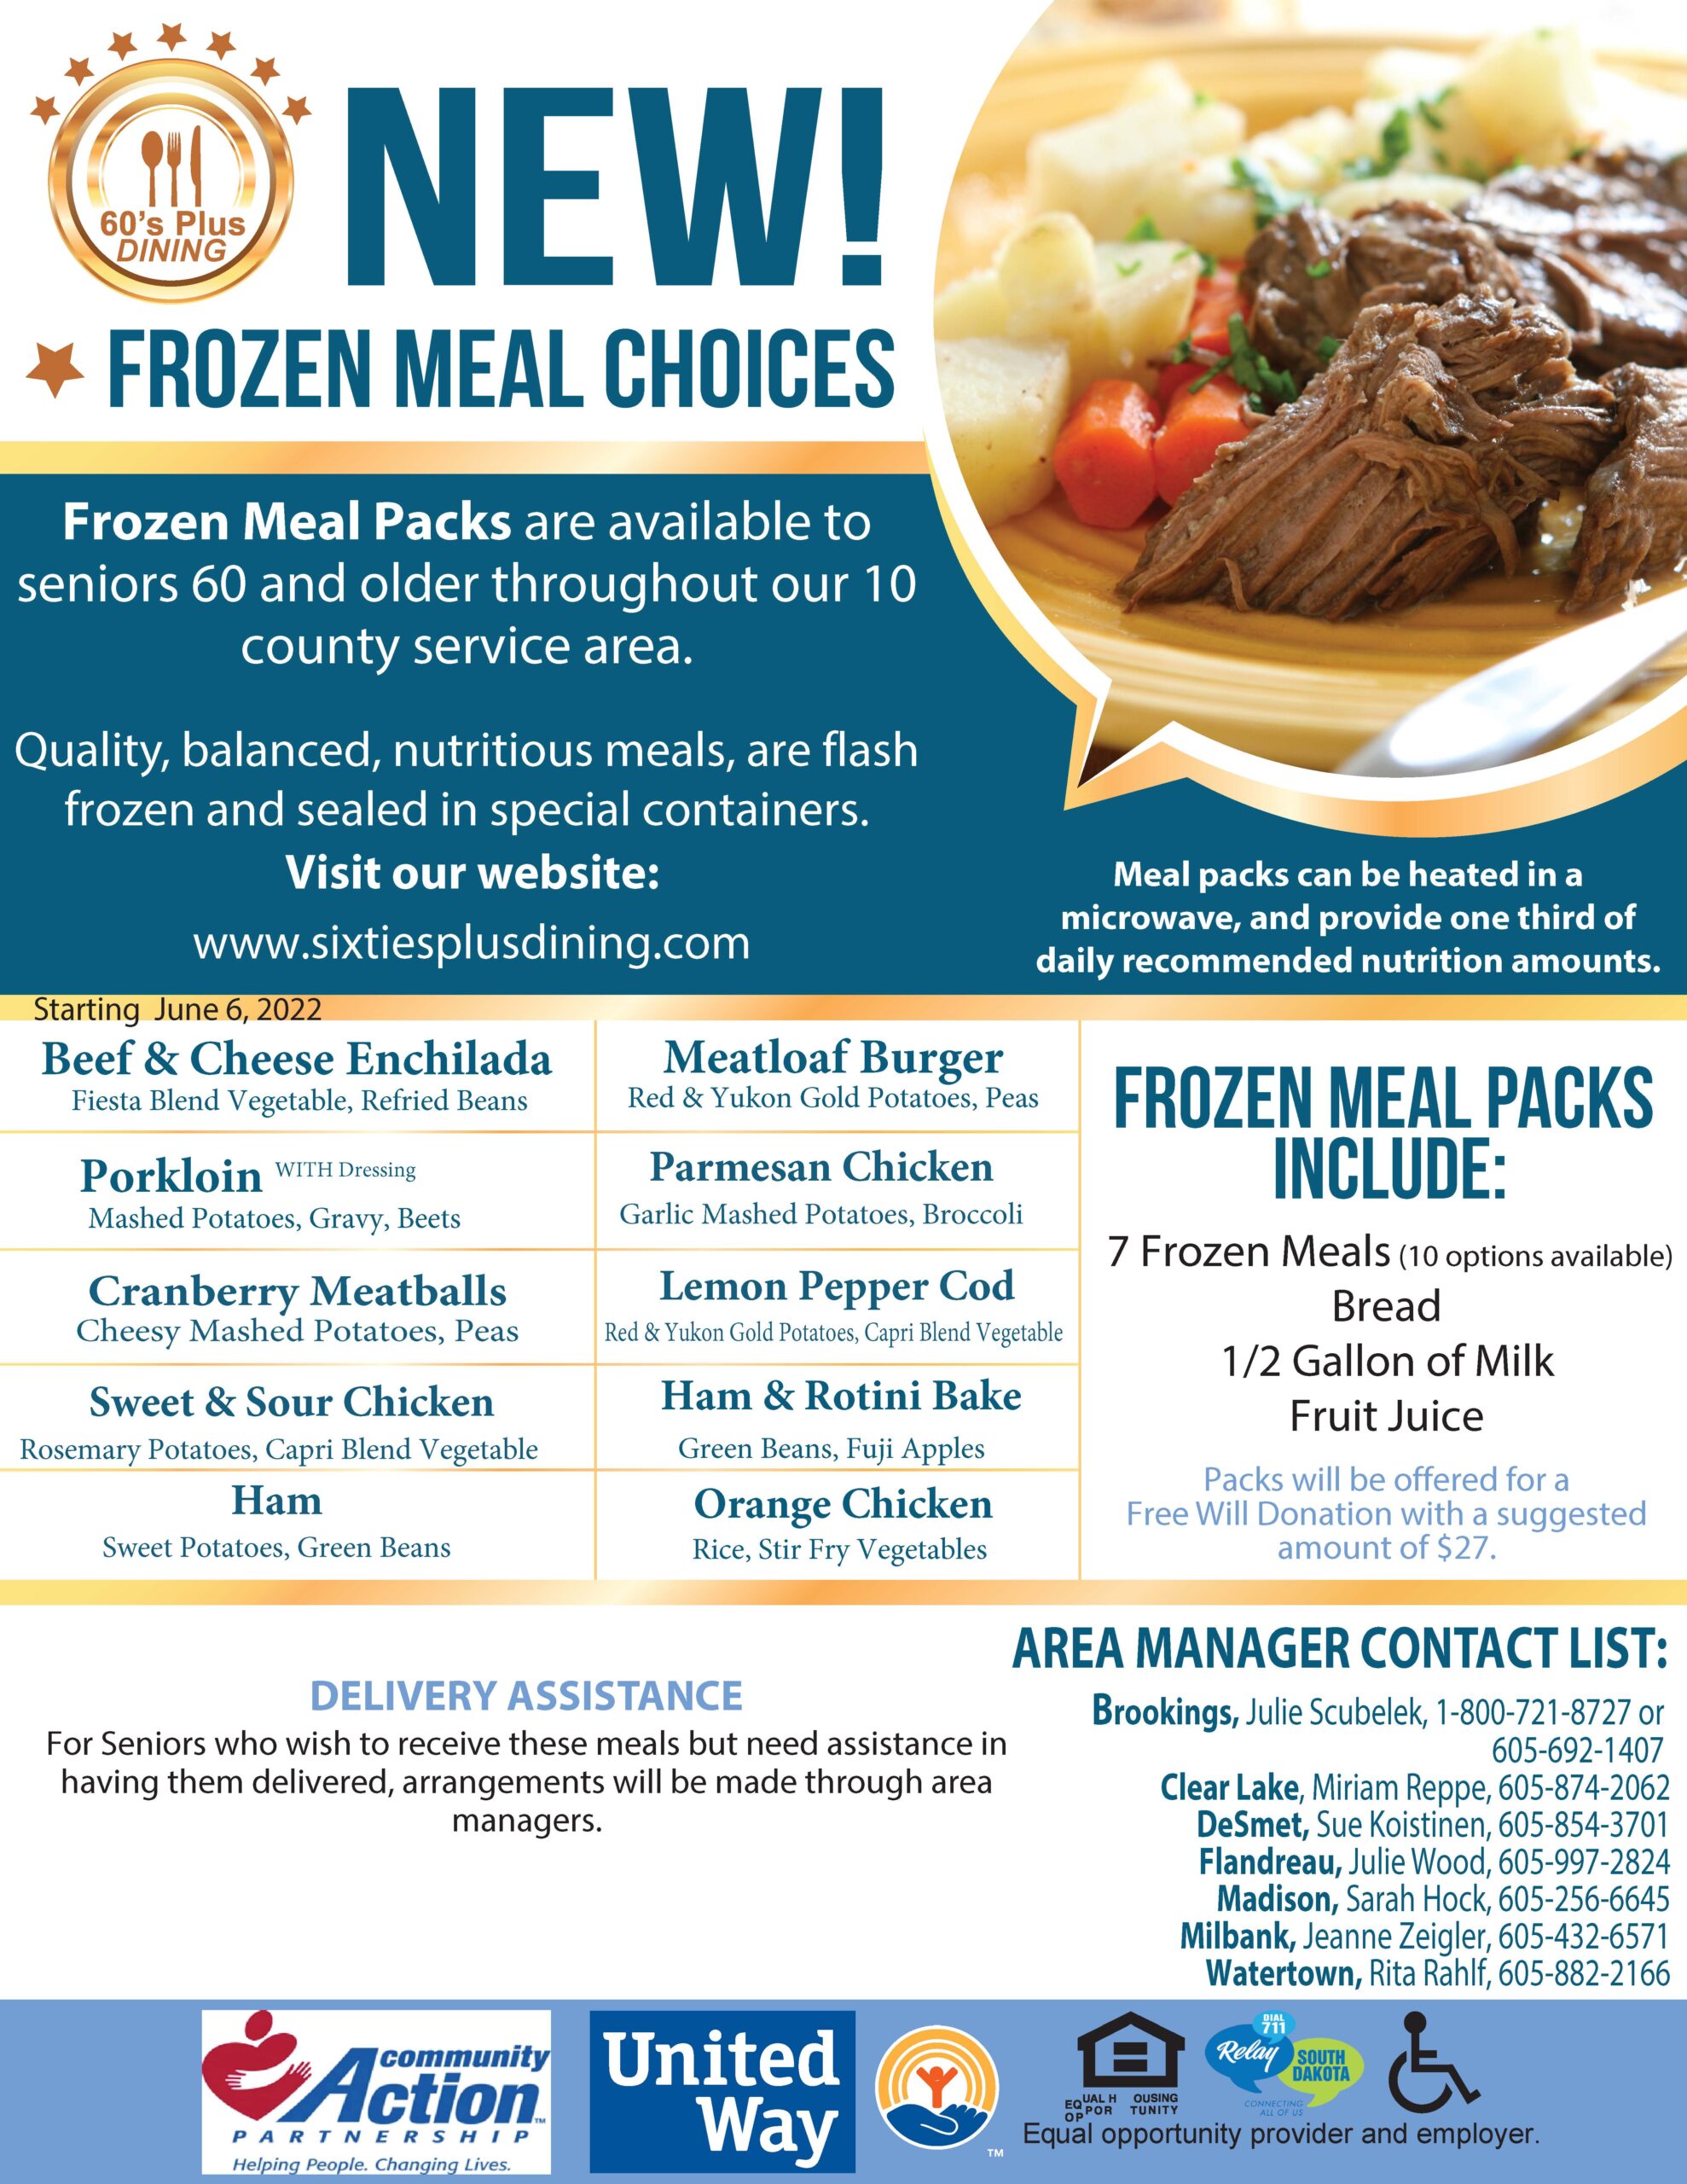 Madison Frozen Meal Choices -June 2022